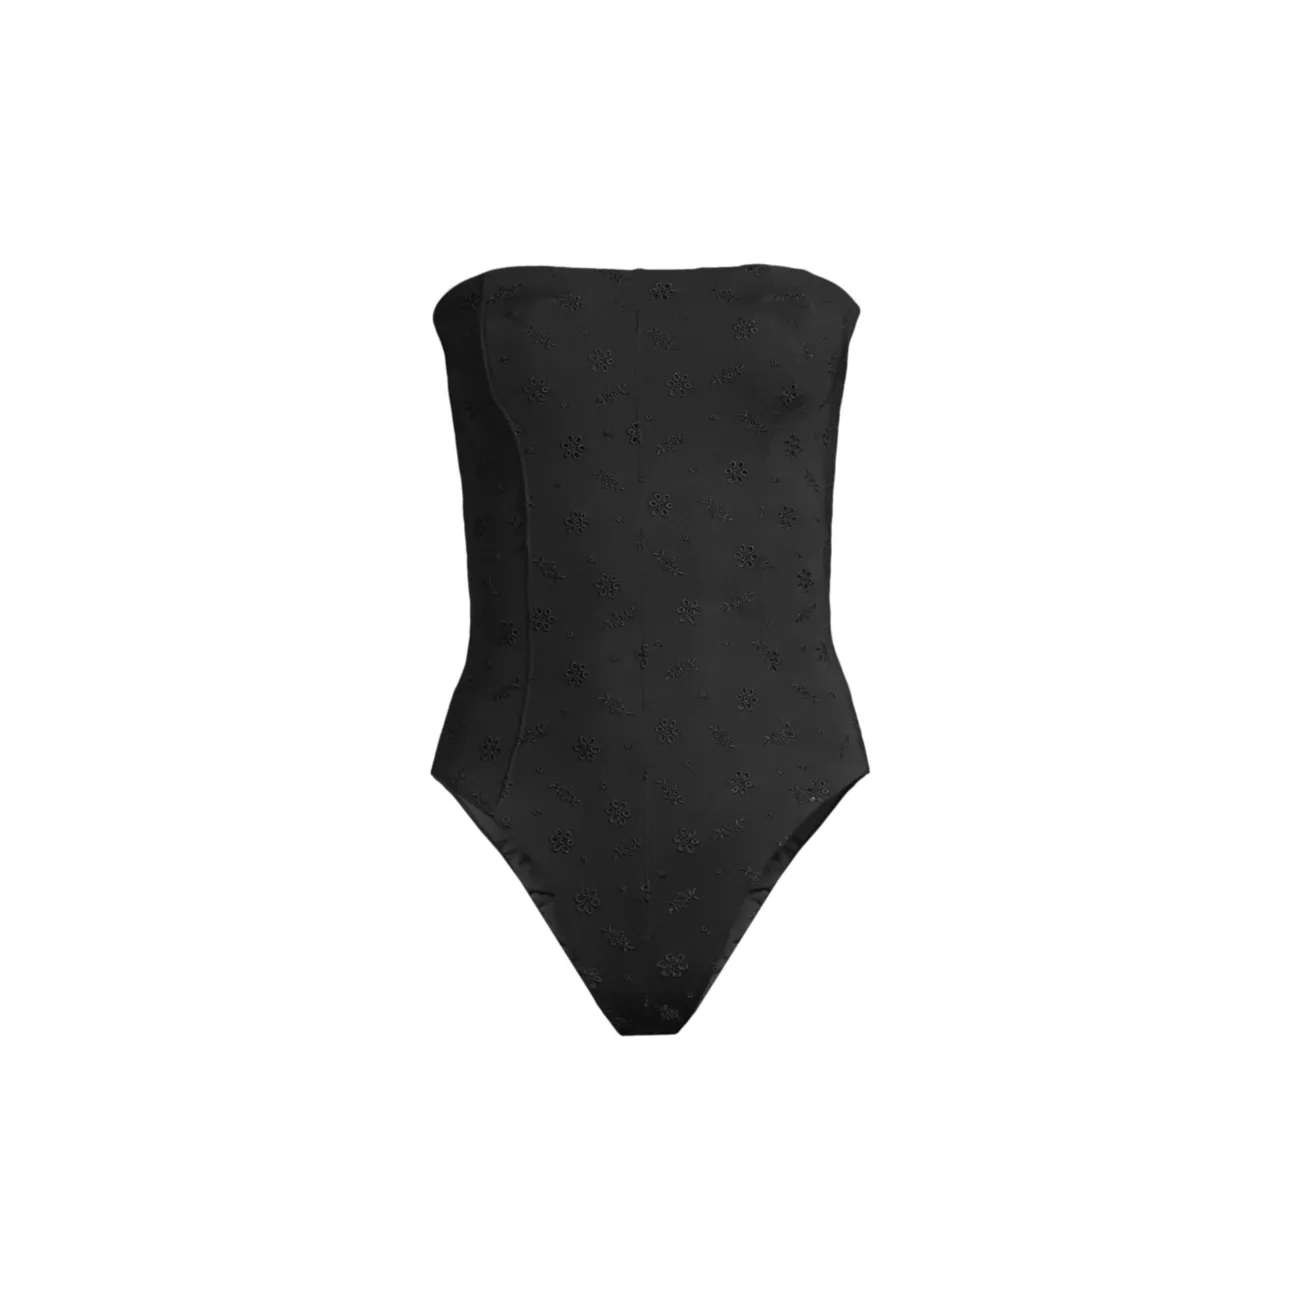 Strapless One-Piece Swimsuit WeWoreWhat